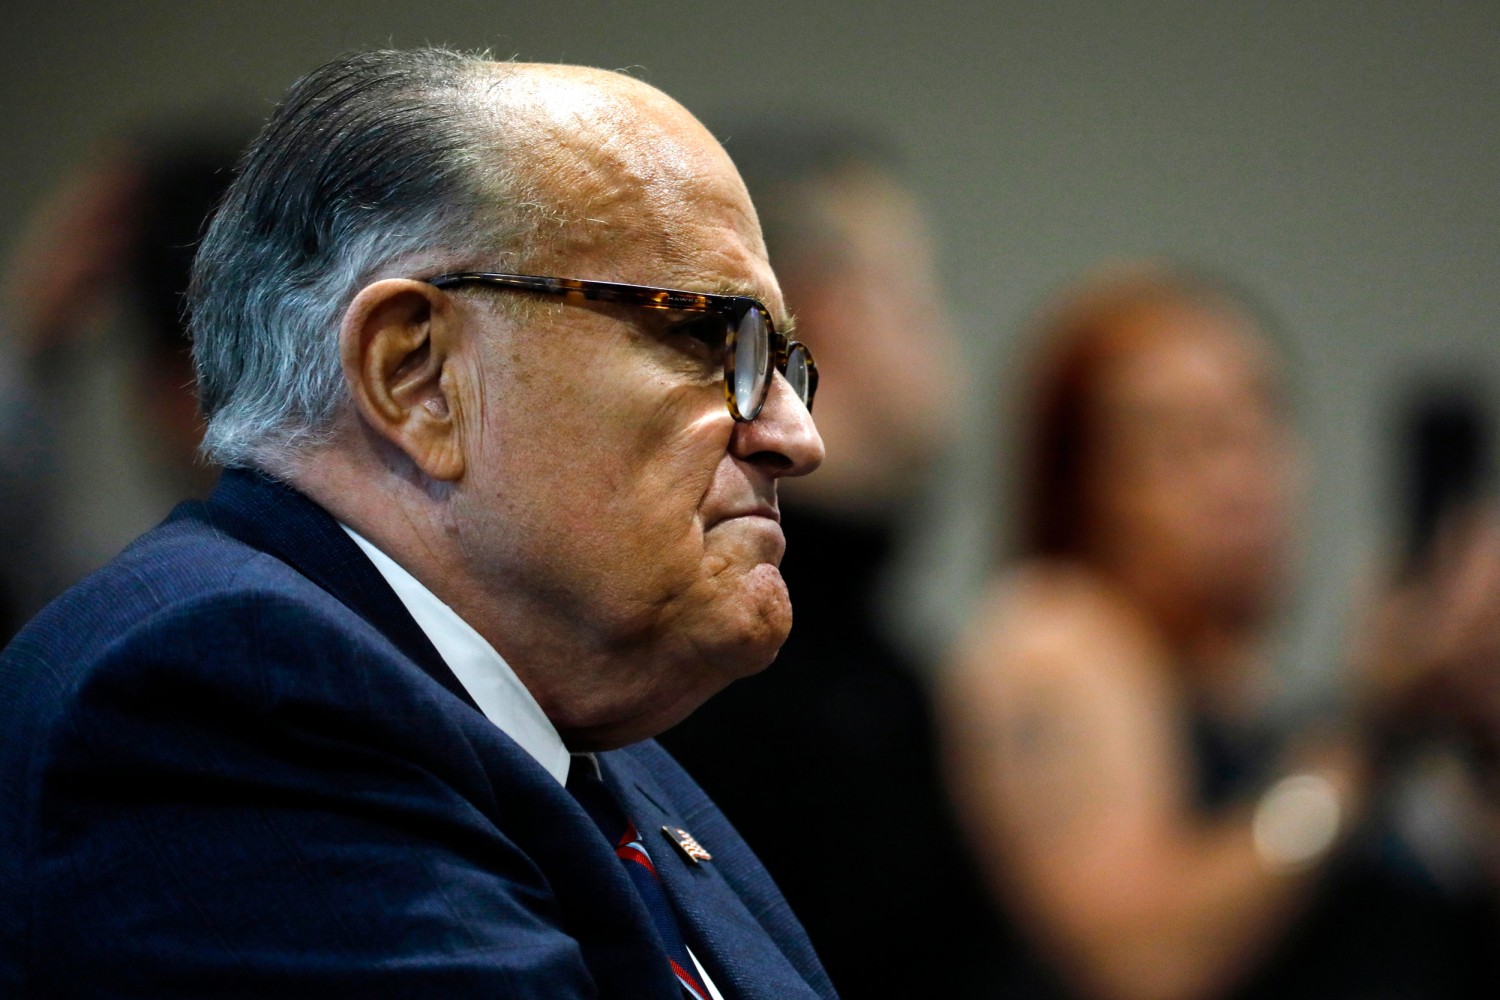 Rudy Giuliani says the supermarket employee accused of slapping him should  be prosecuted